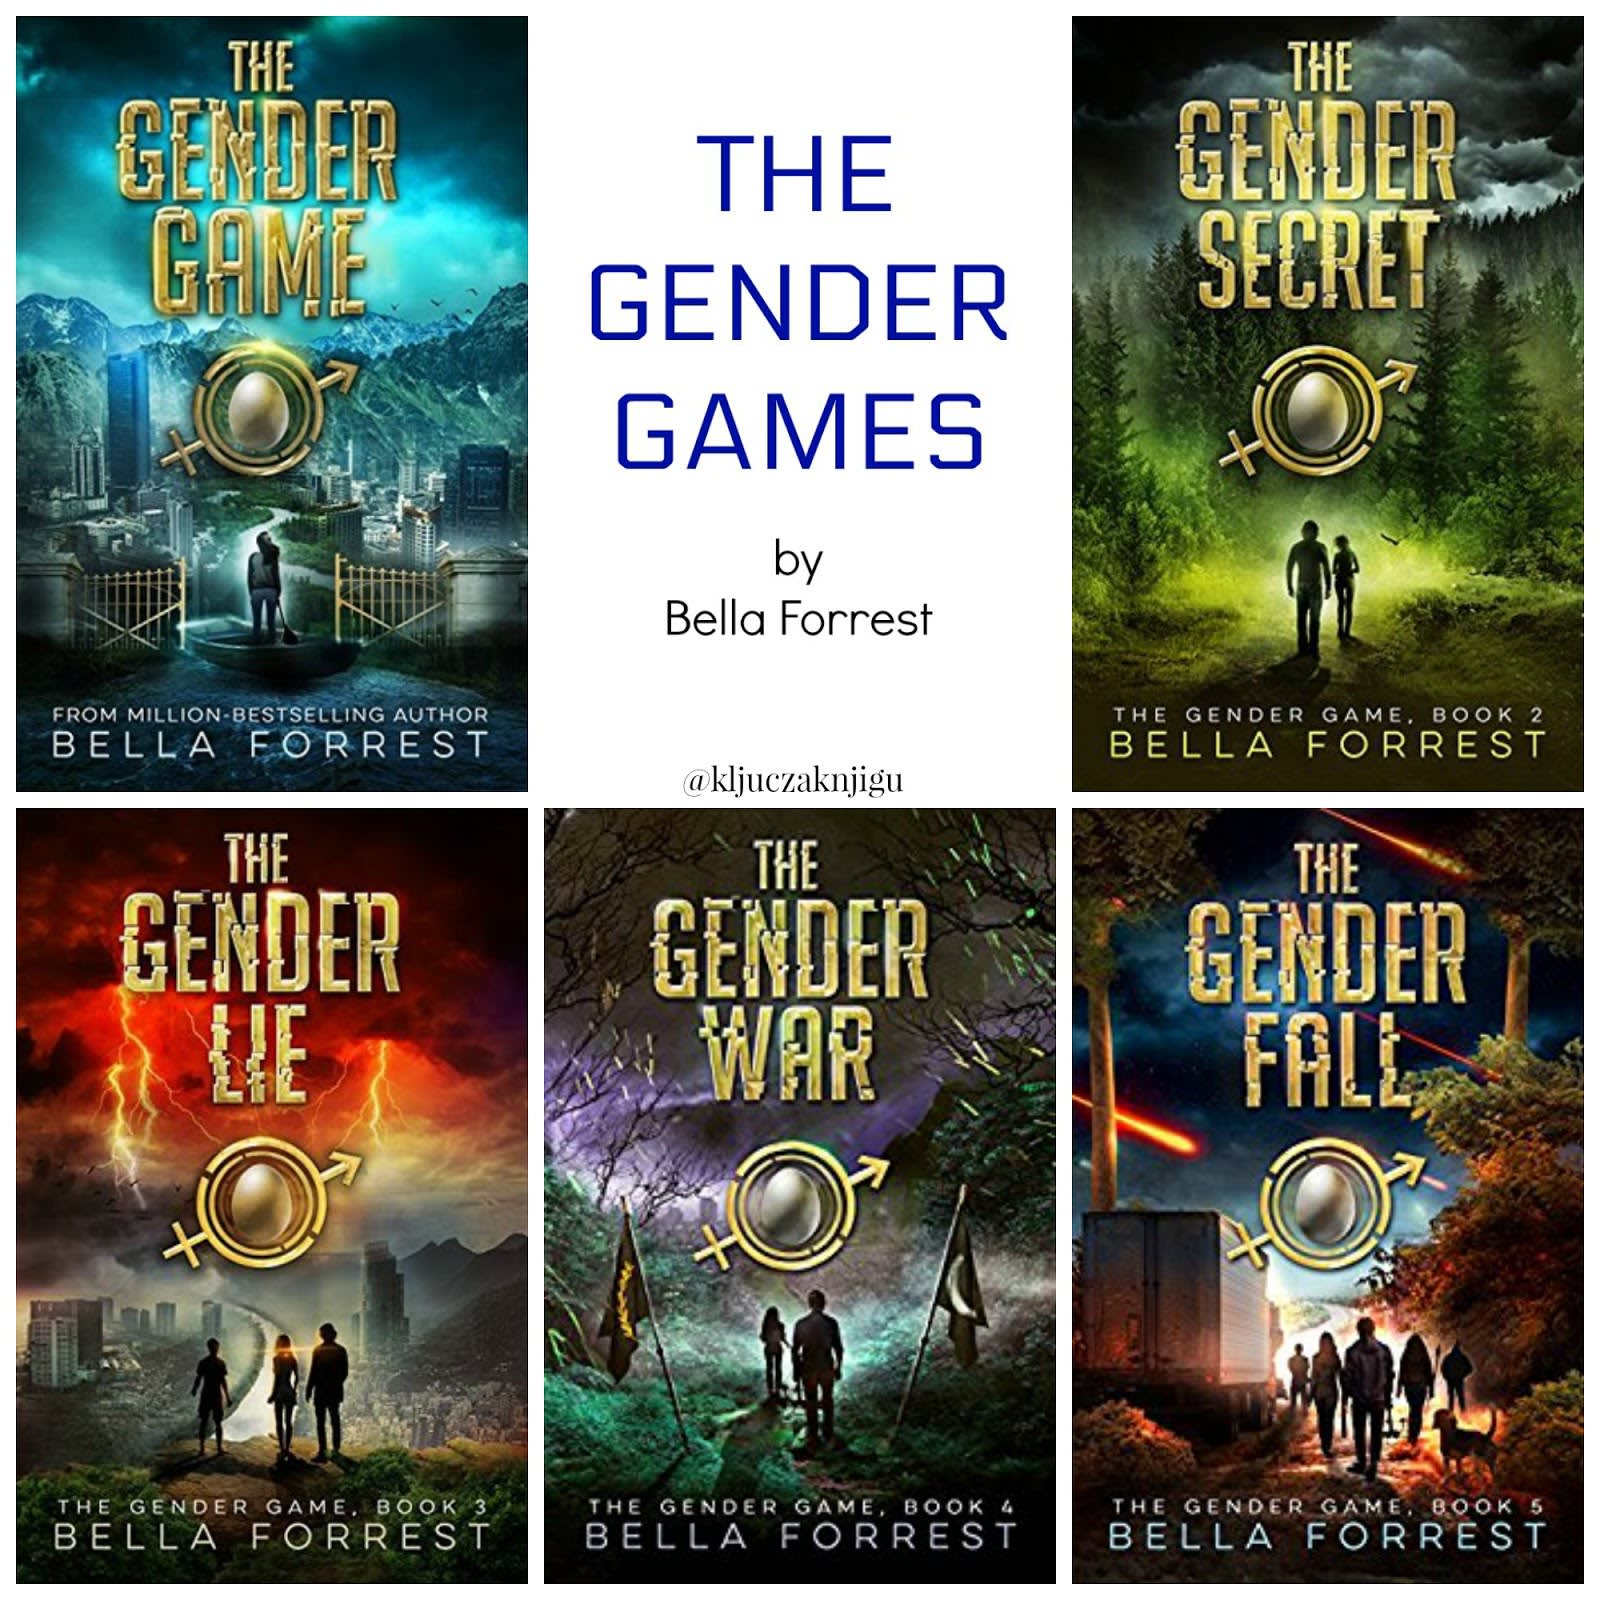 The Gender Game Series by Bella Forrest – Propensity to Discuss